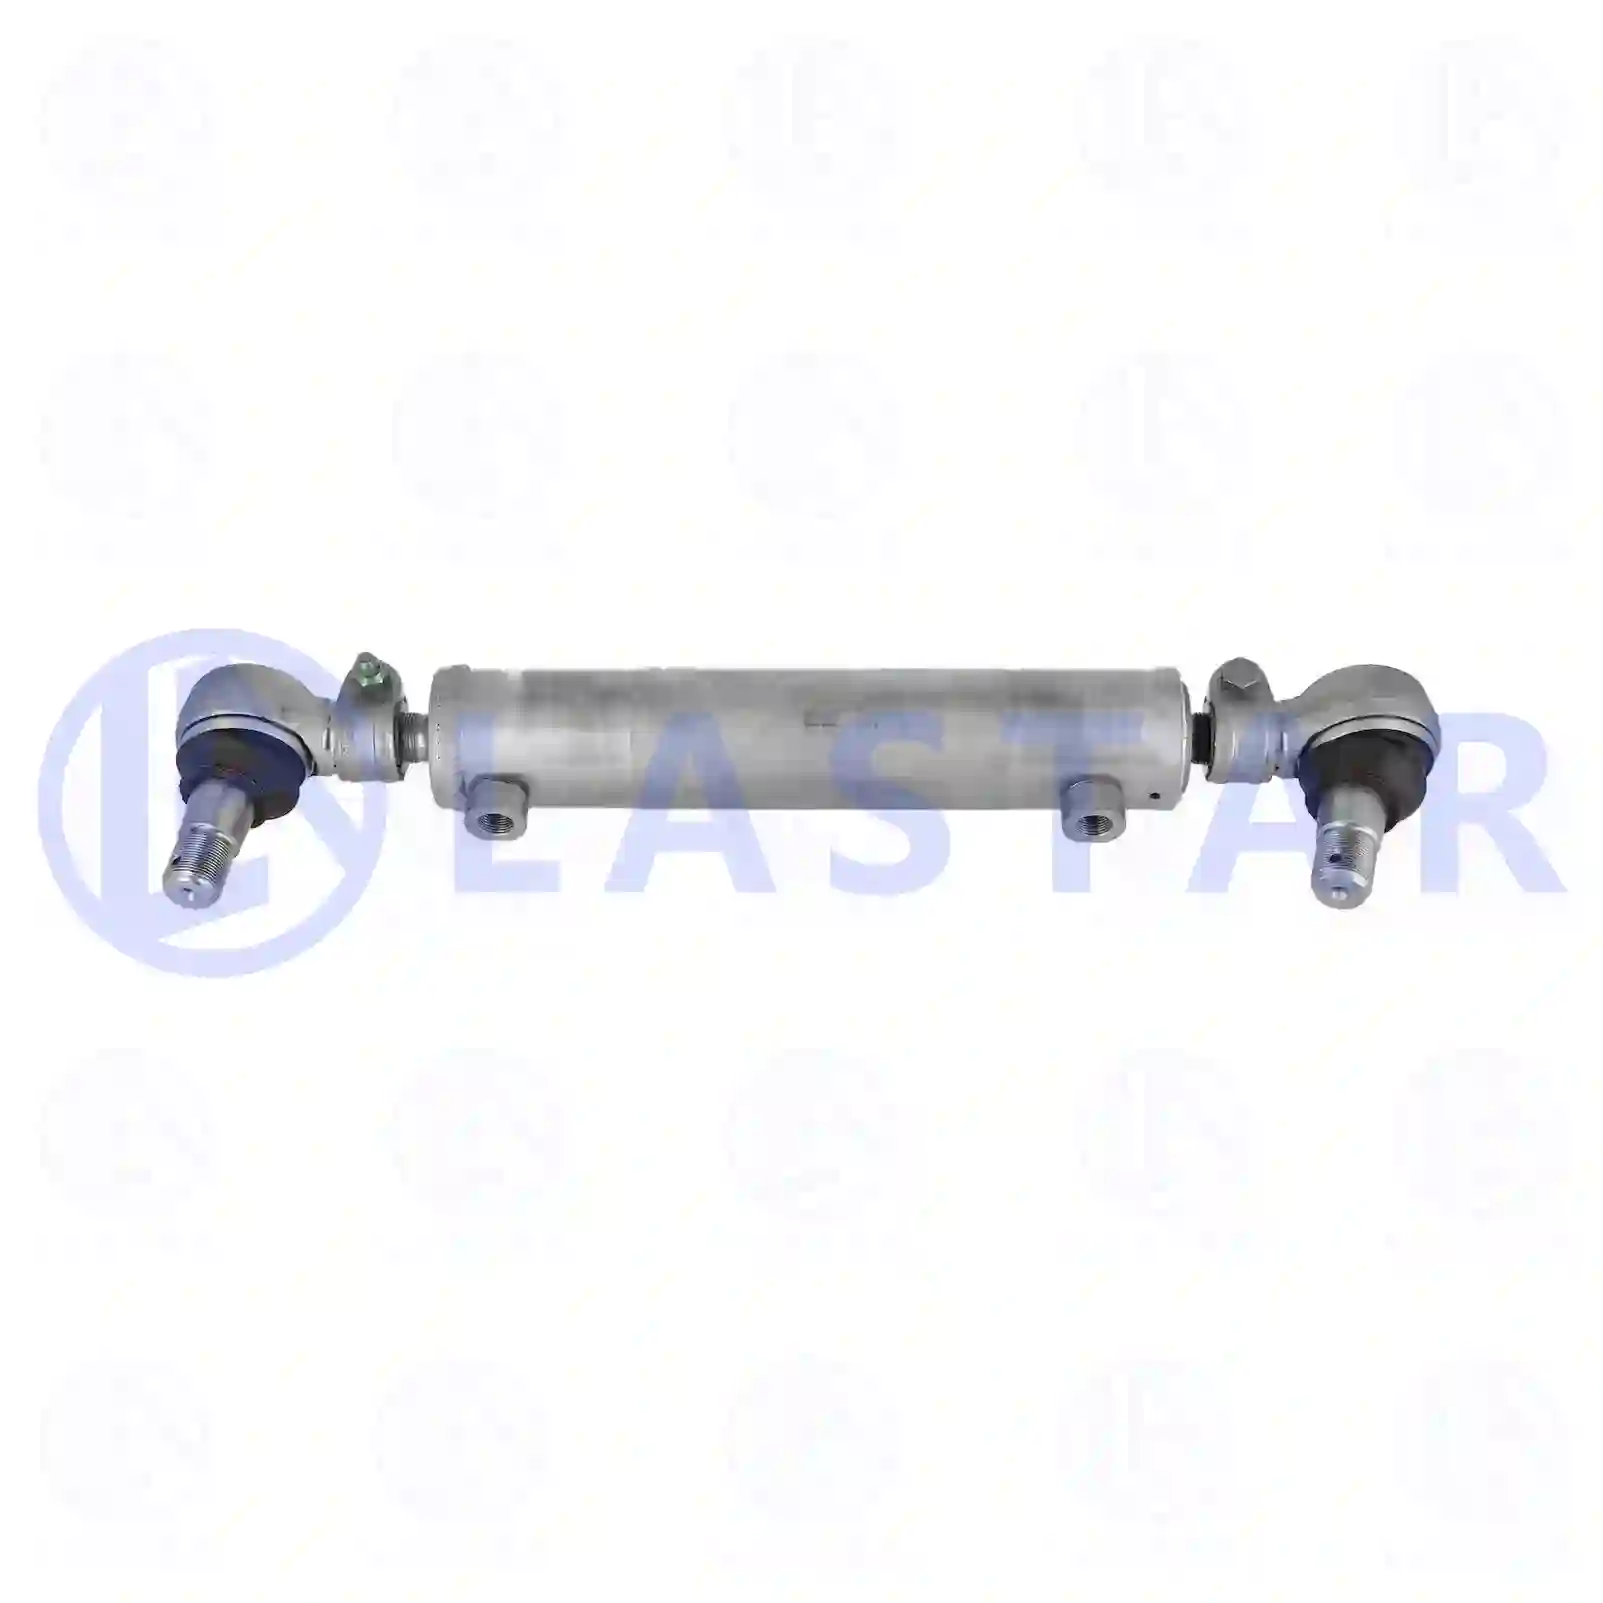 Steering cylinder, 77705721, 5010630753, , , , , , ||  77705721 Lastar Spare Part | Truck Spare Parts, Auotomotive Spare Parts Steering cylinder, 77705721, 5010630753, , , , , , ||  77705721 Lastar Spare Part | Truck Spare Parts, Auotomotive Spare Parts